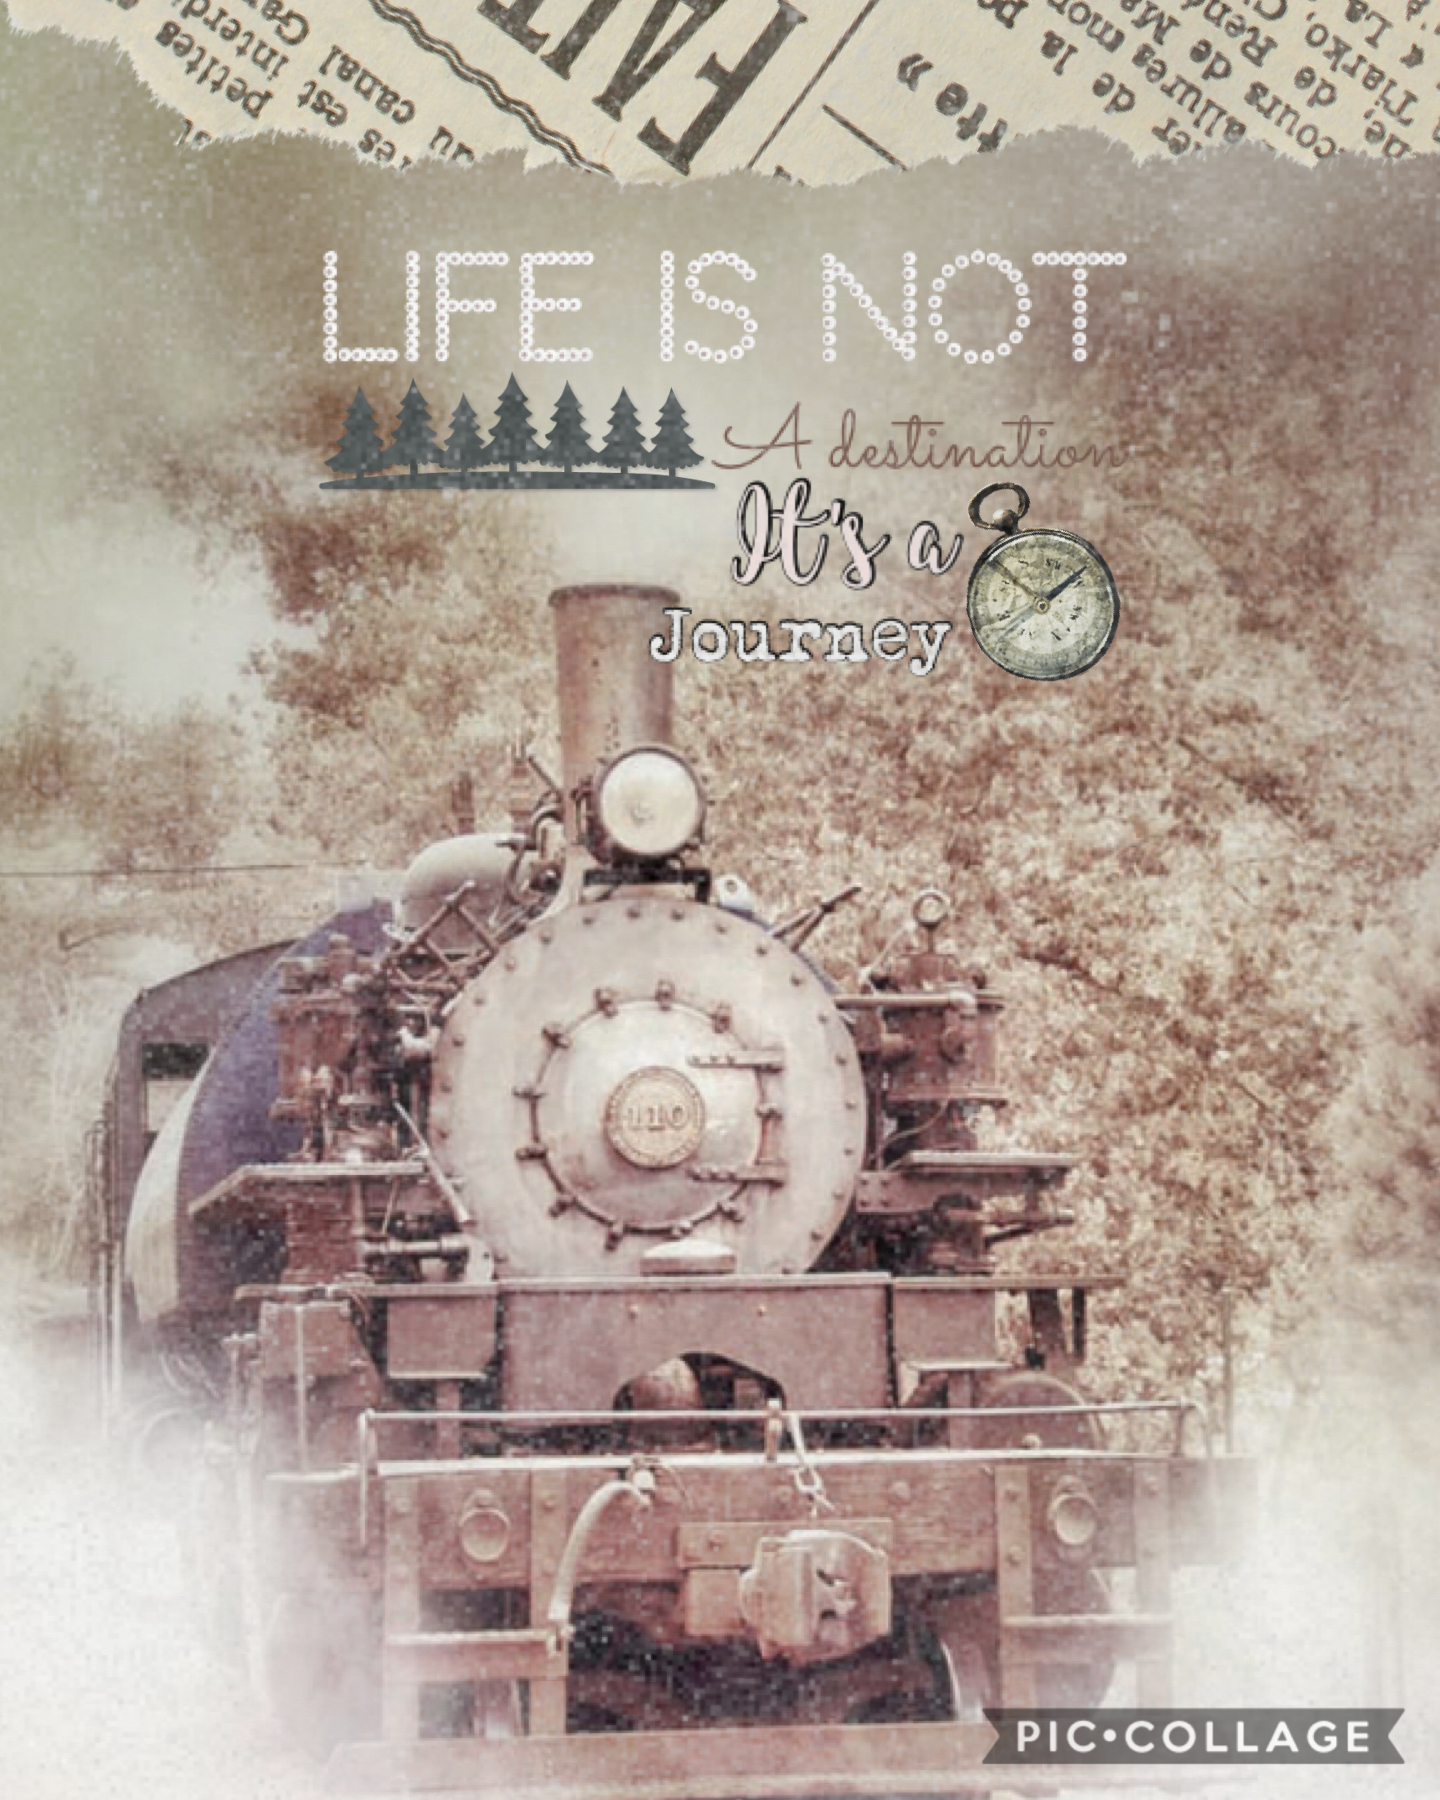 🚂 collab with 🚂
My amazing sister Peace_and_Dreams,
I did the text and newspaper png and she did the background and mist png. 
Qotd: What theme should I do my next collage?